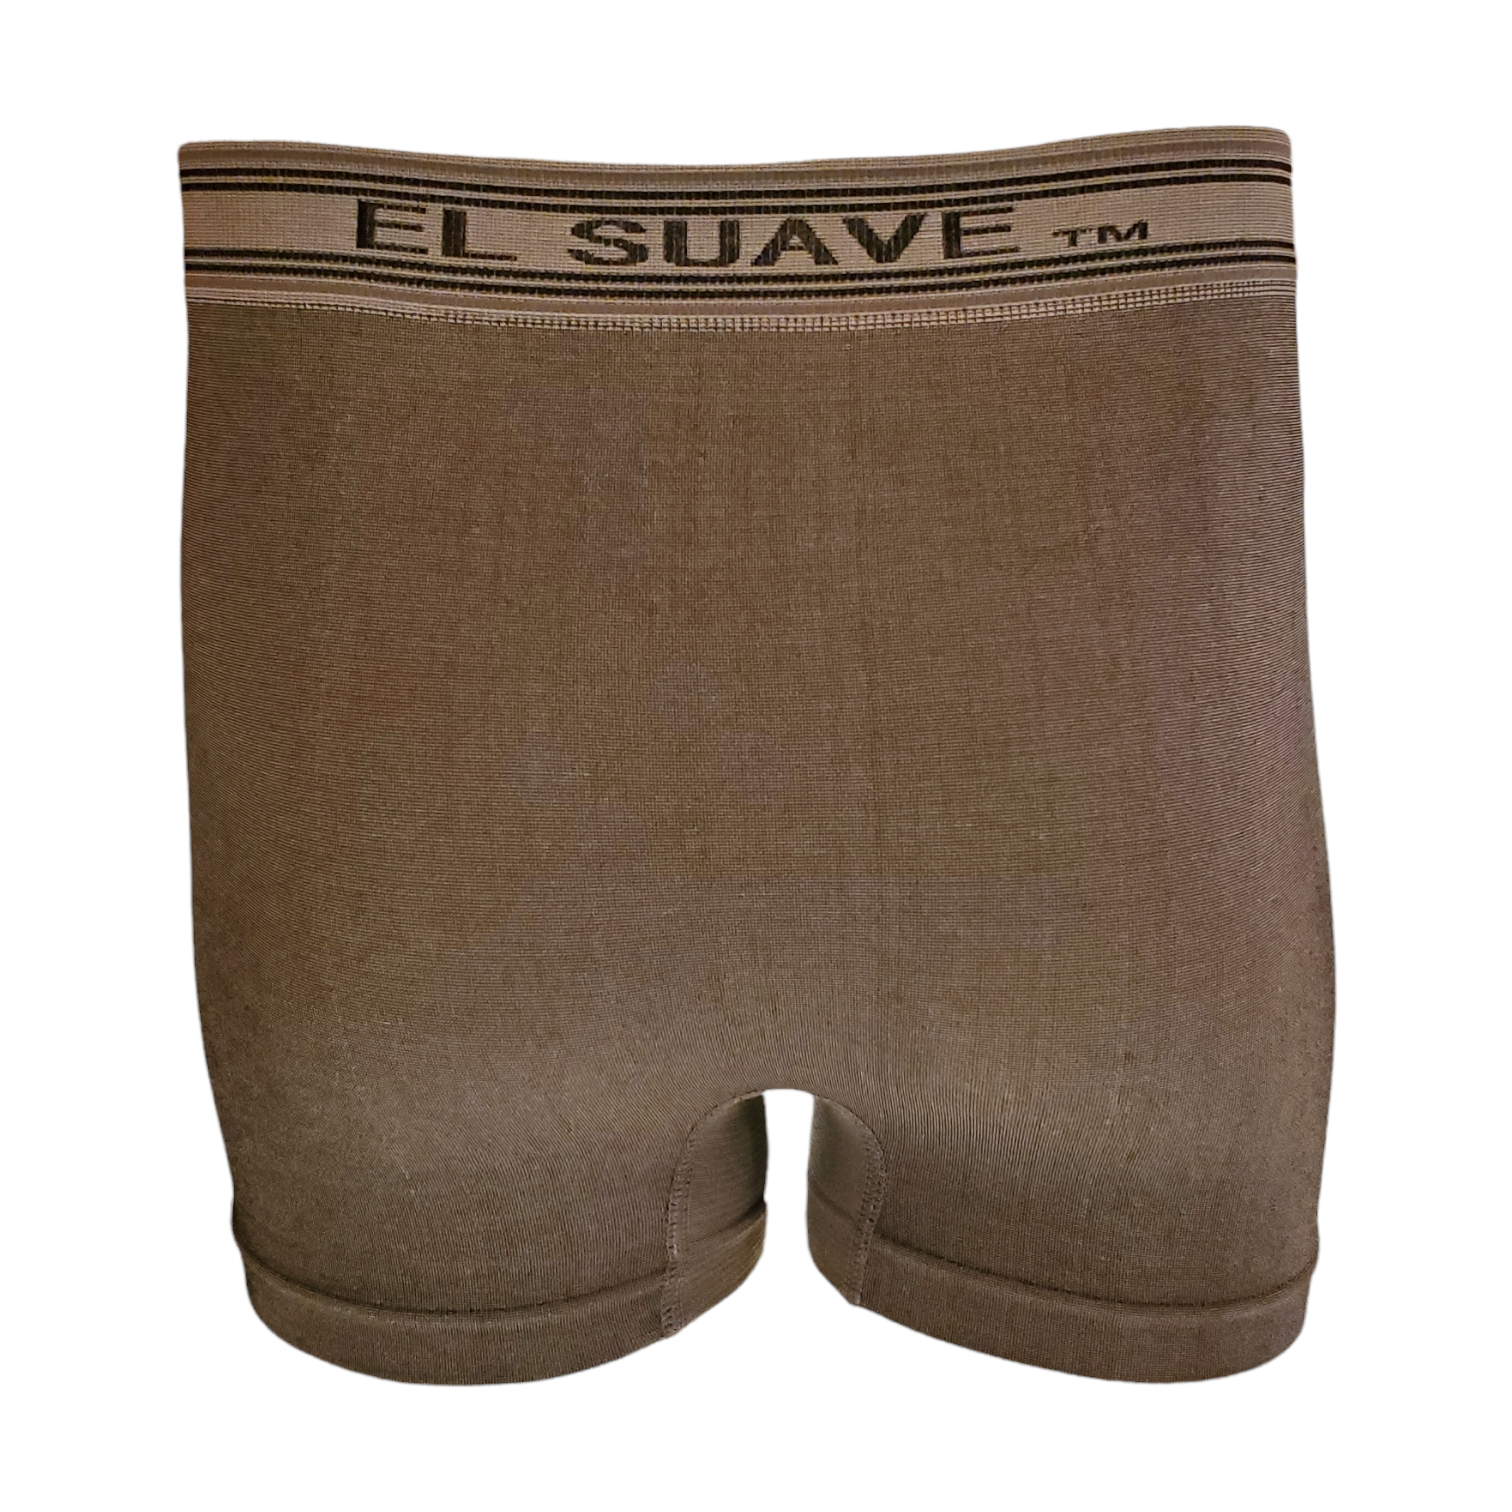 Boys Seamless Boxer Size 2-3 -3pack